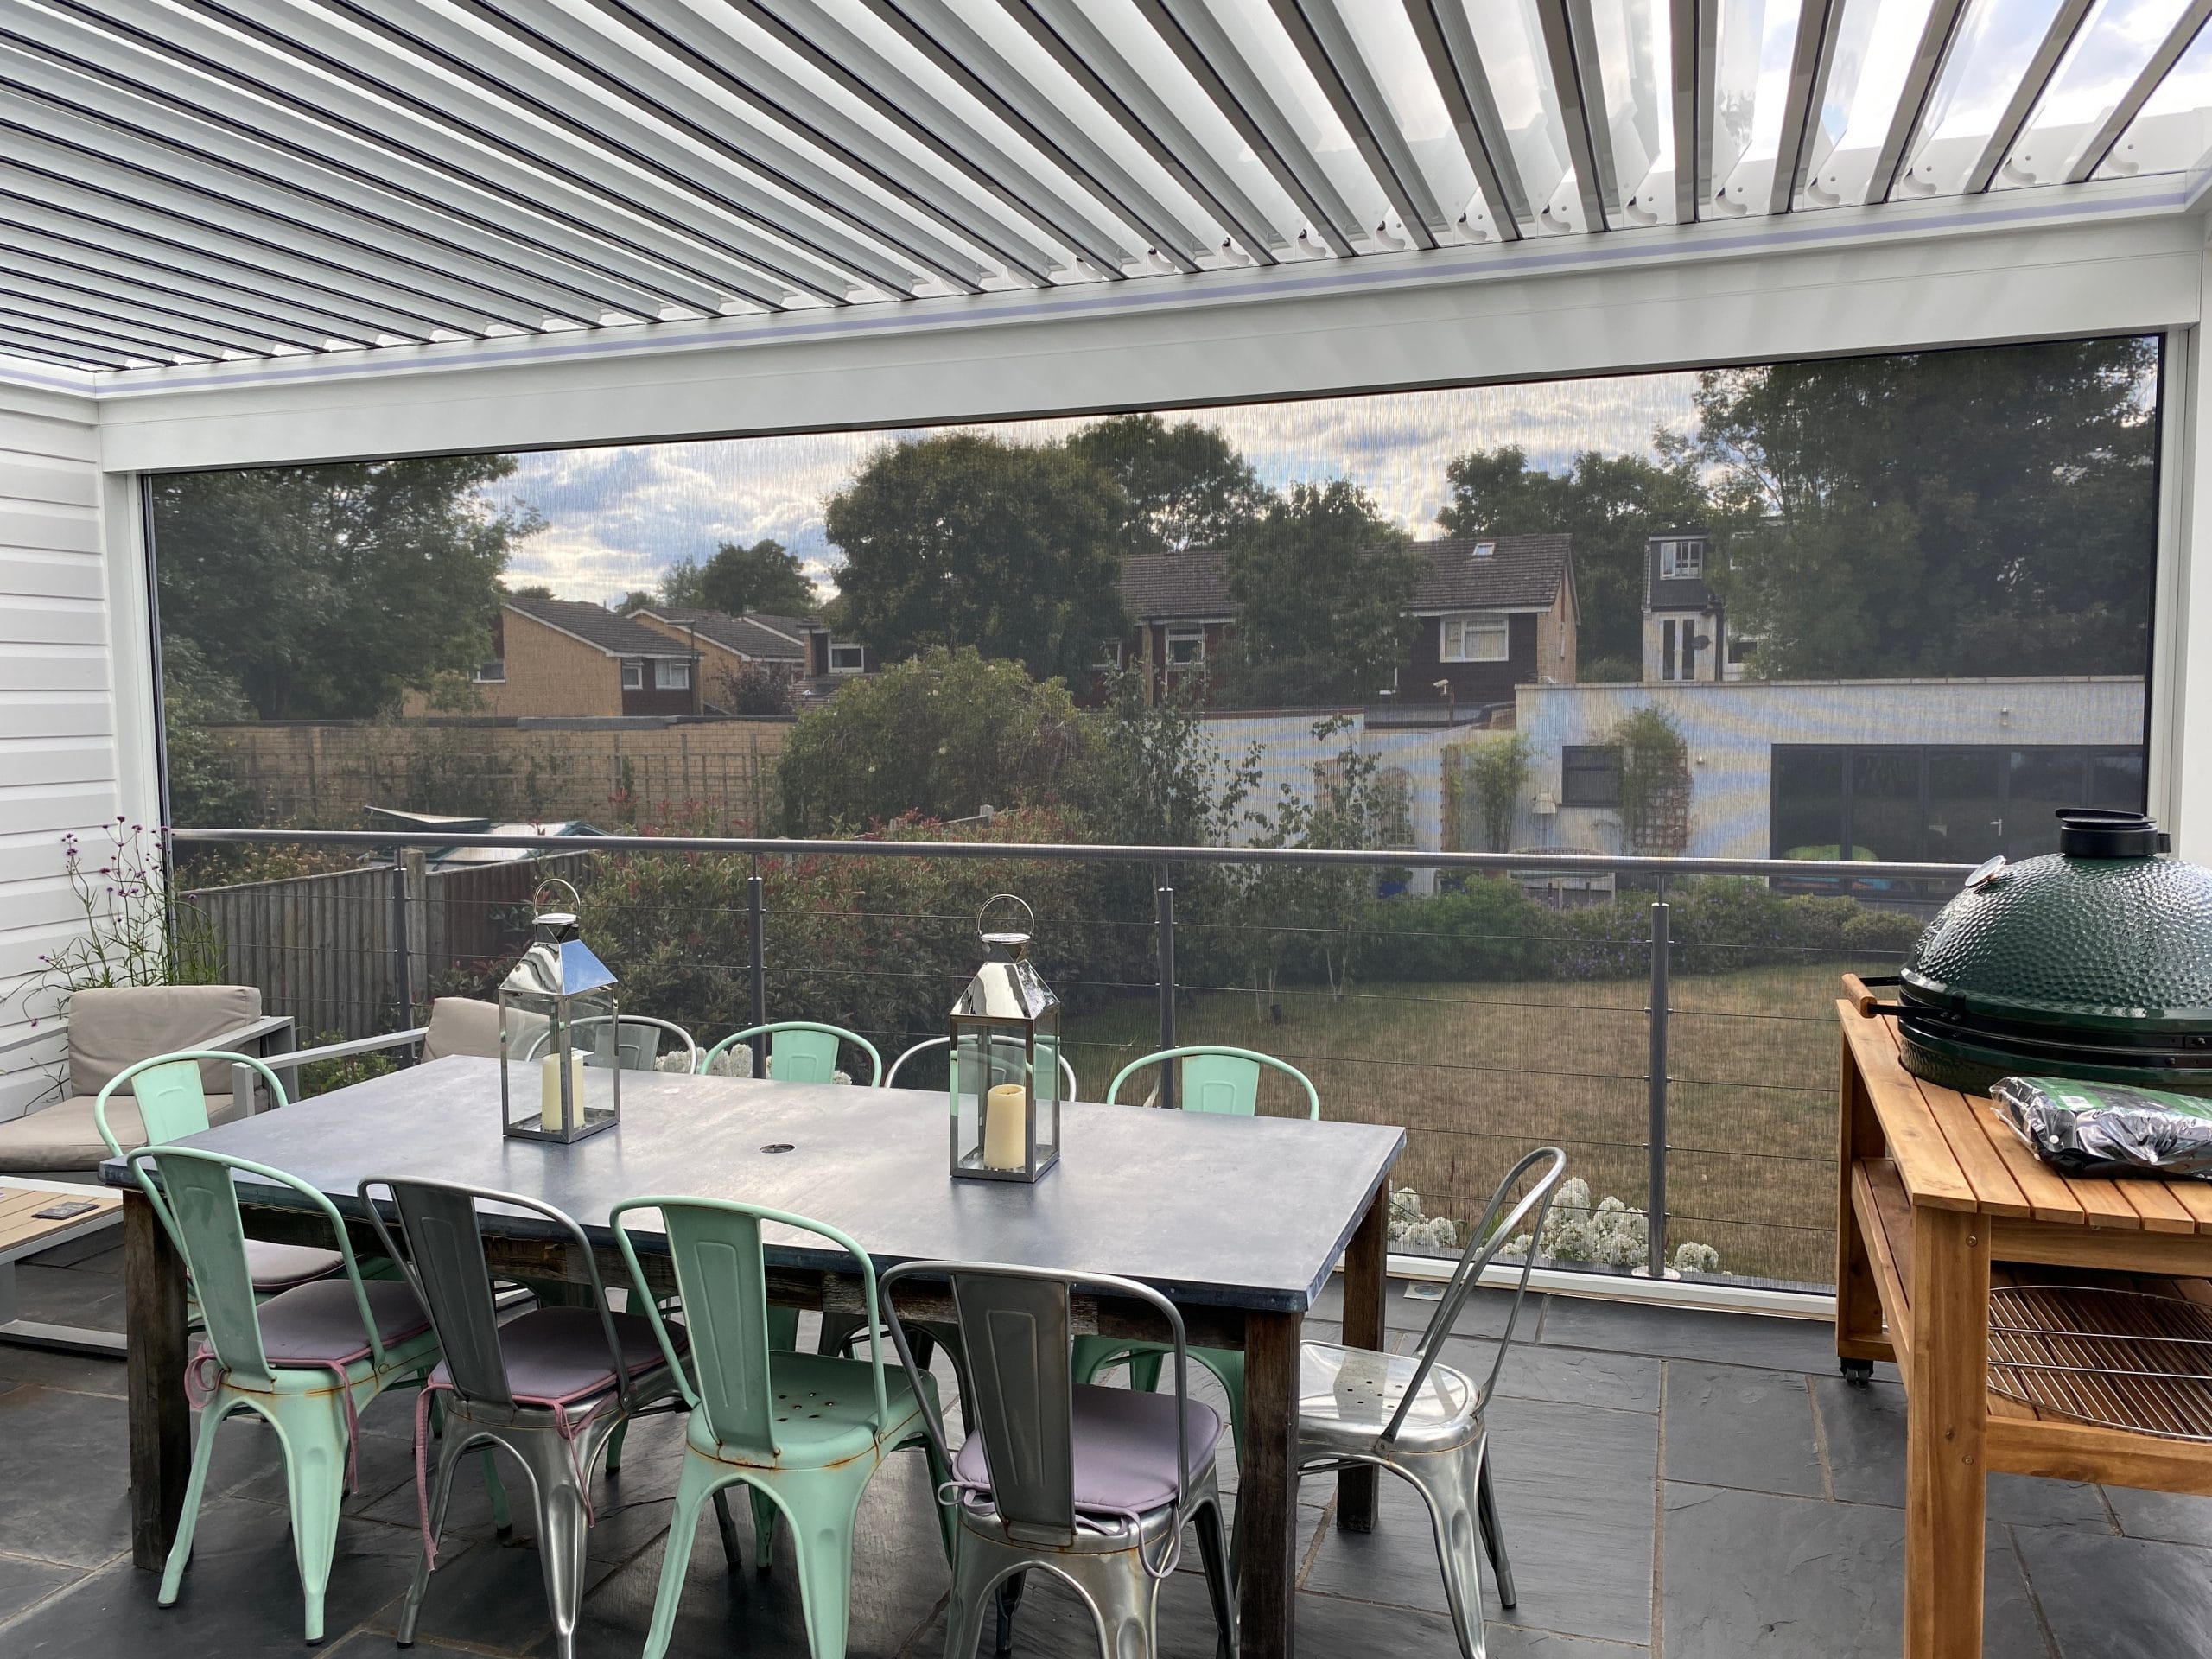 A Visual Guide to Weinor Glass Veranda Styles: Find Your Perfect Match